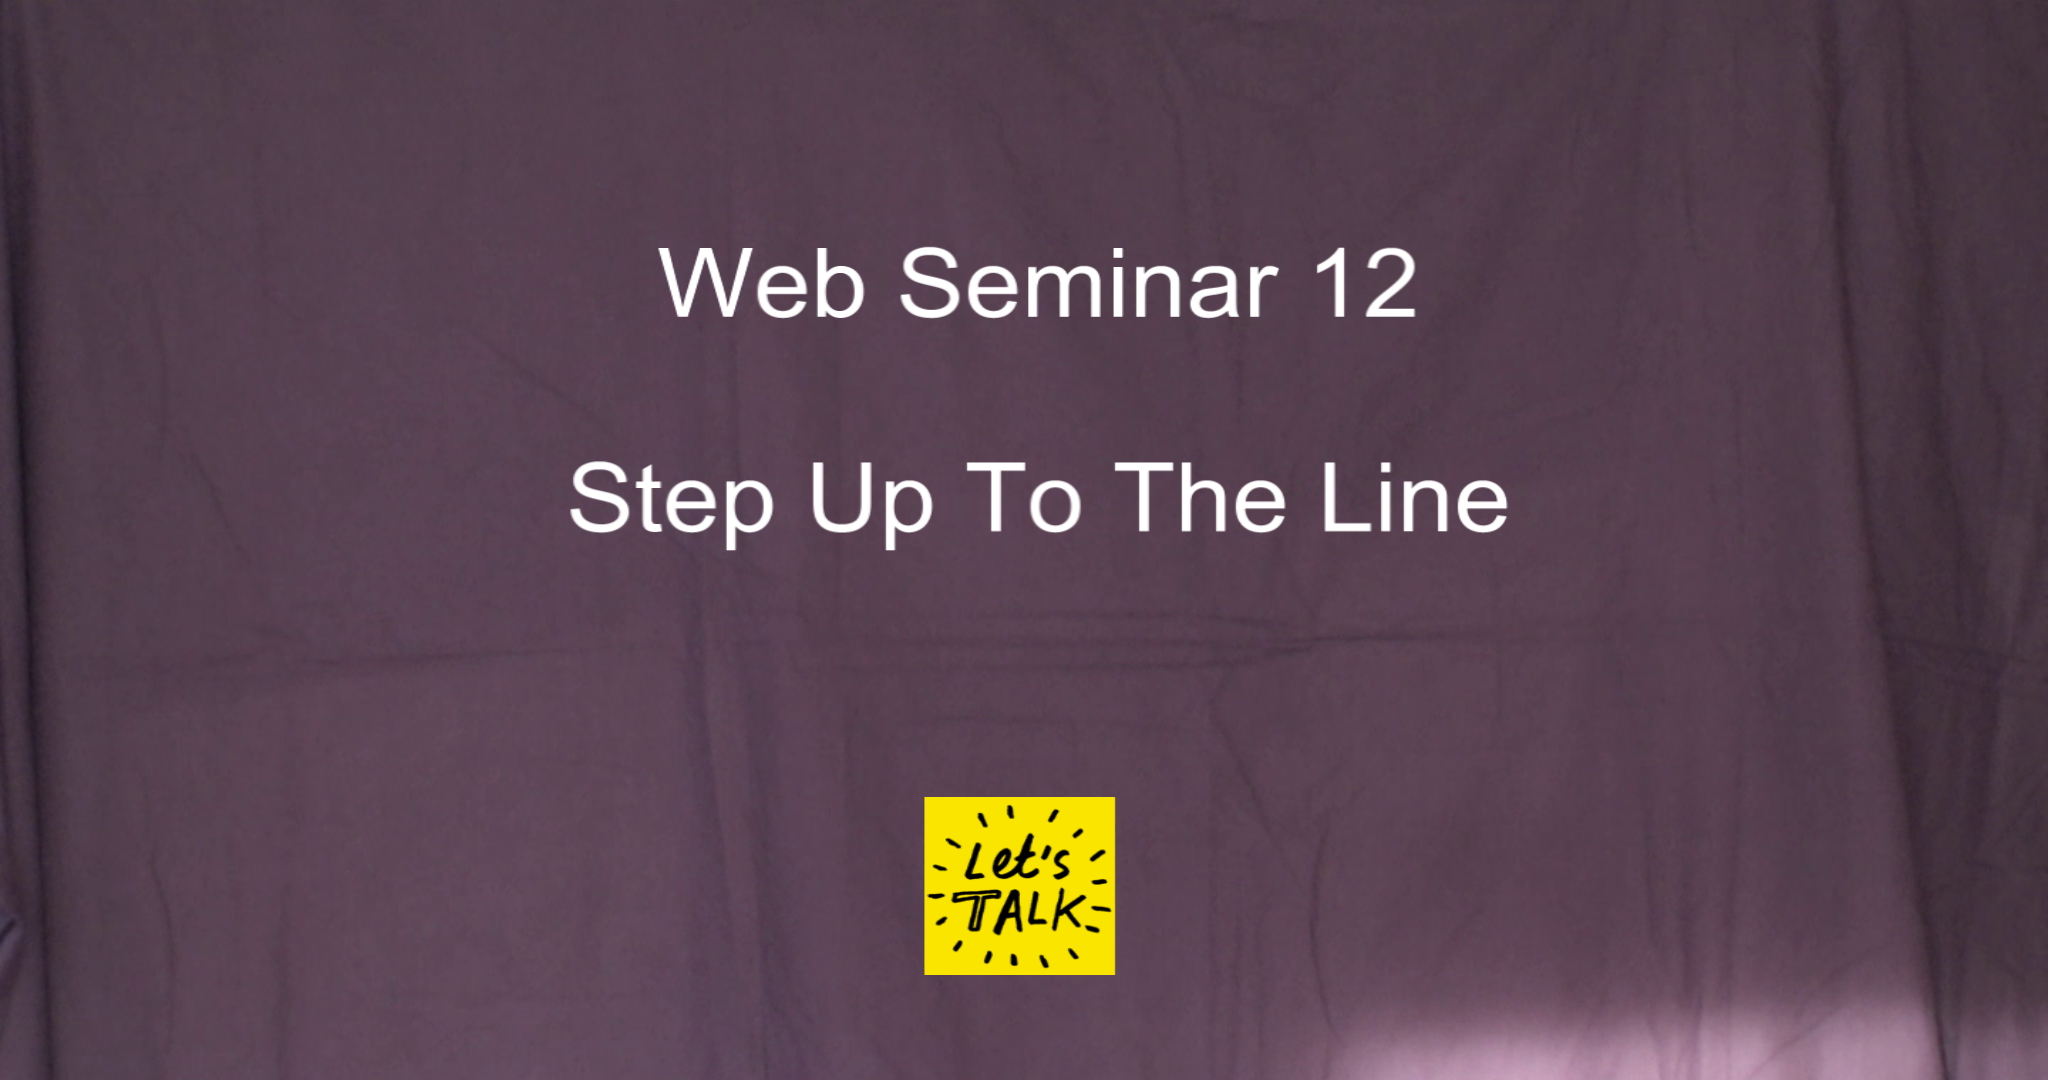 Web Seminar 12 - Step Up To The Line